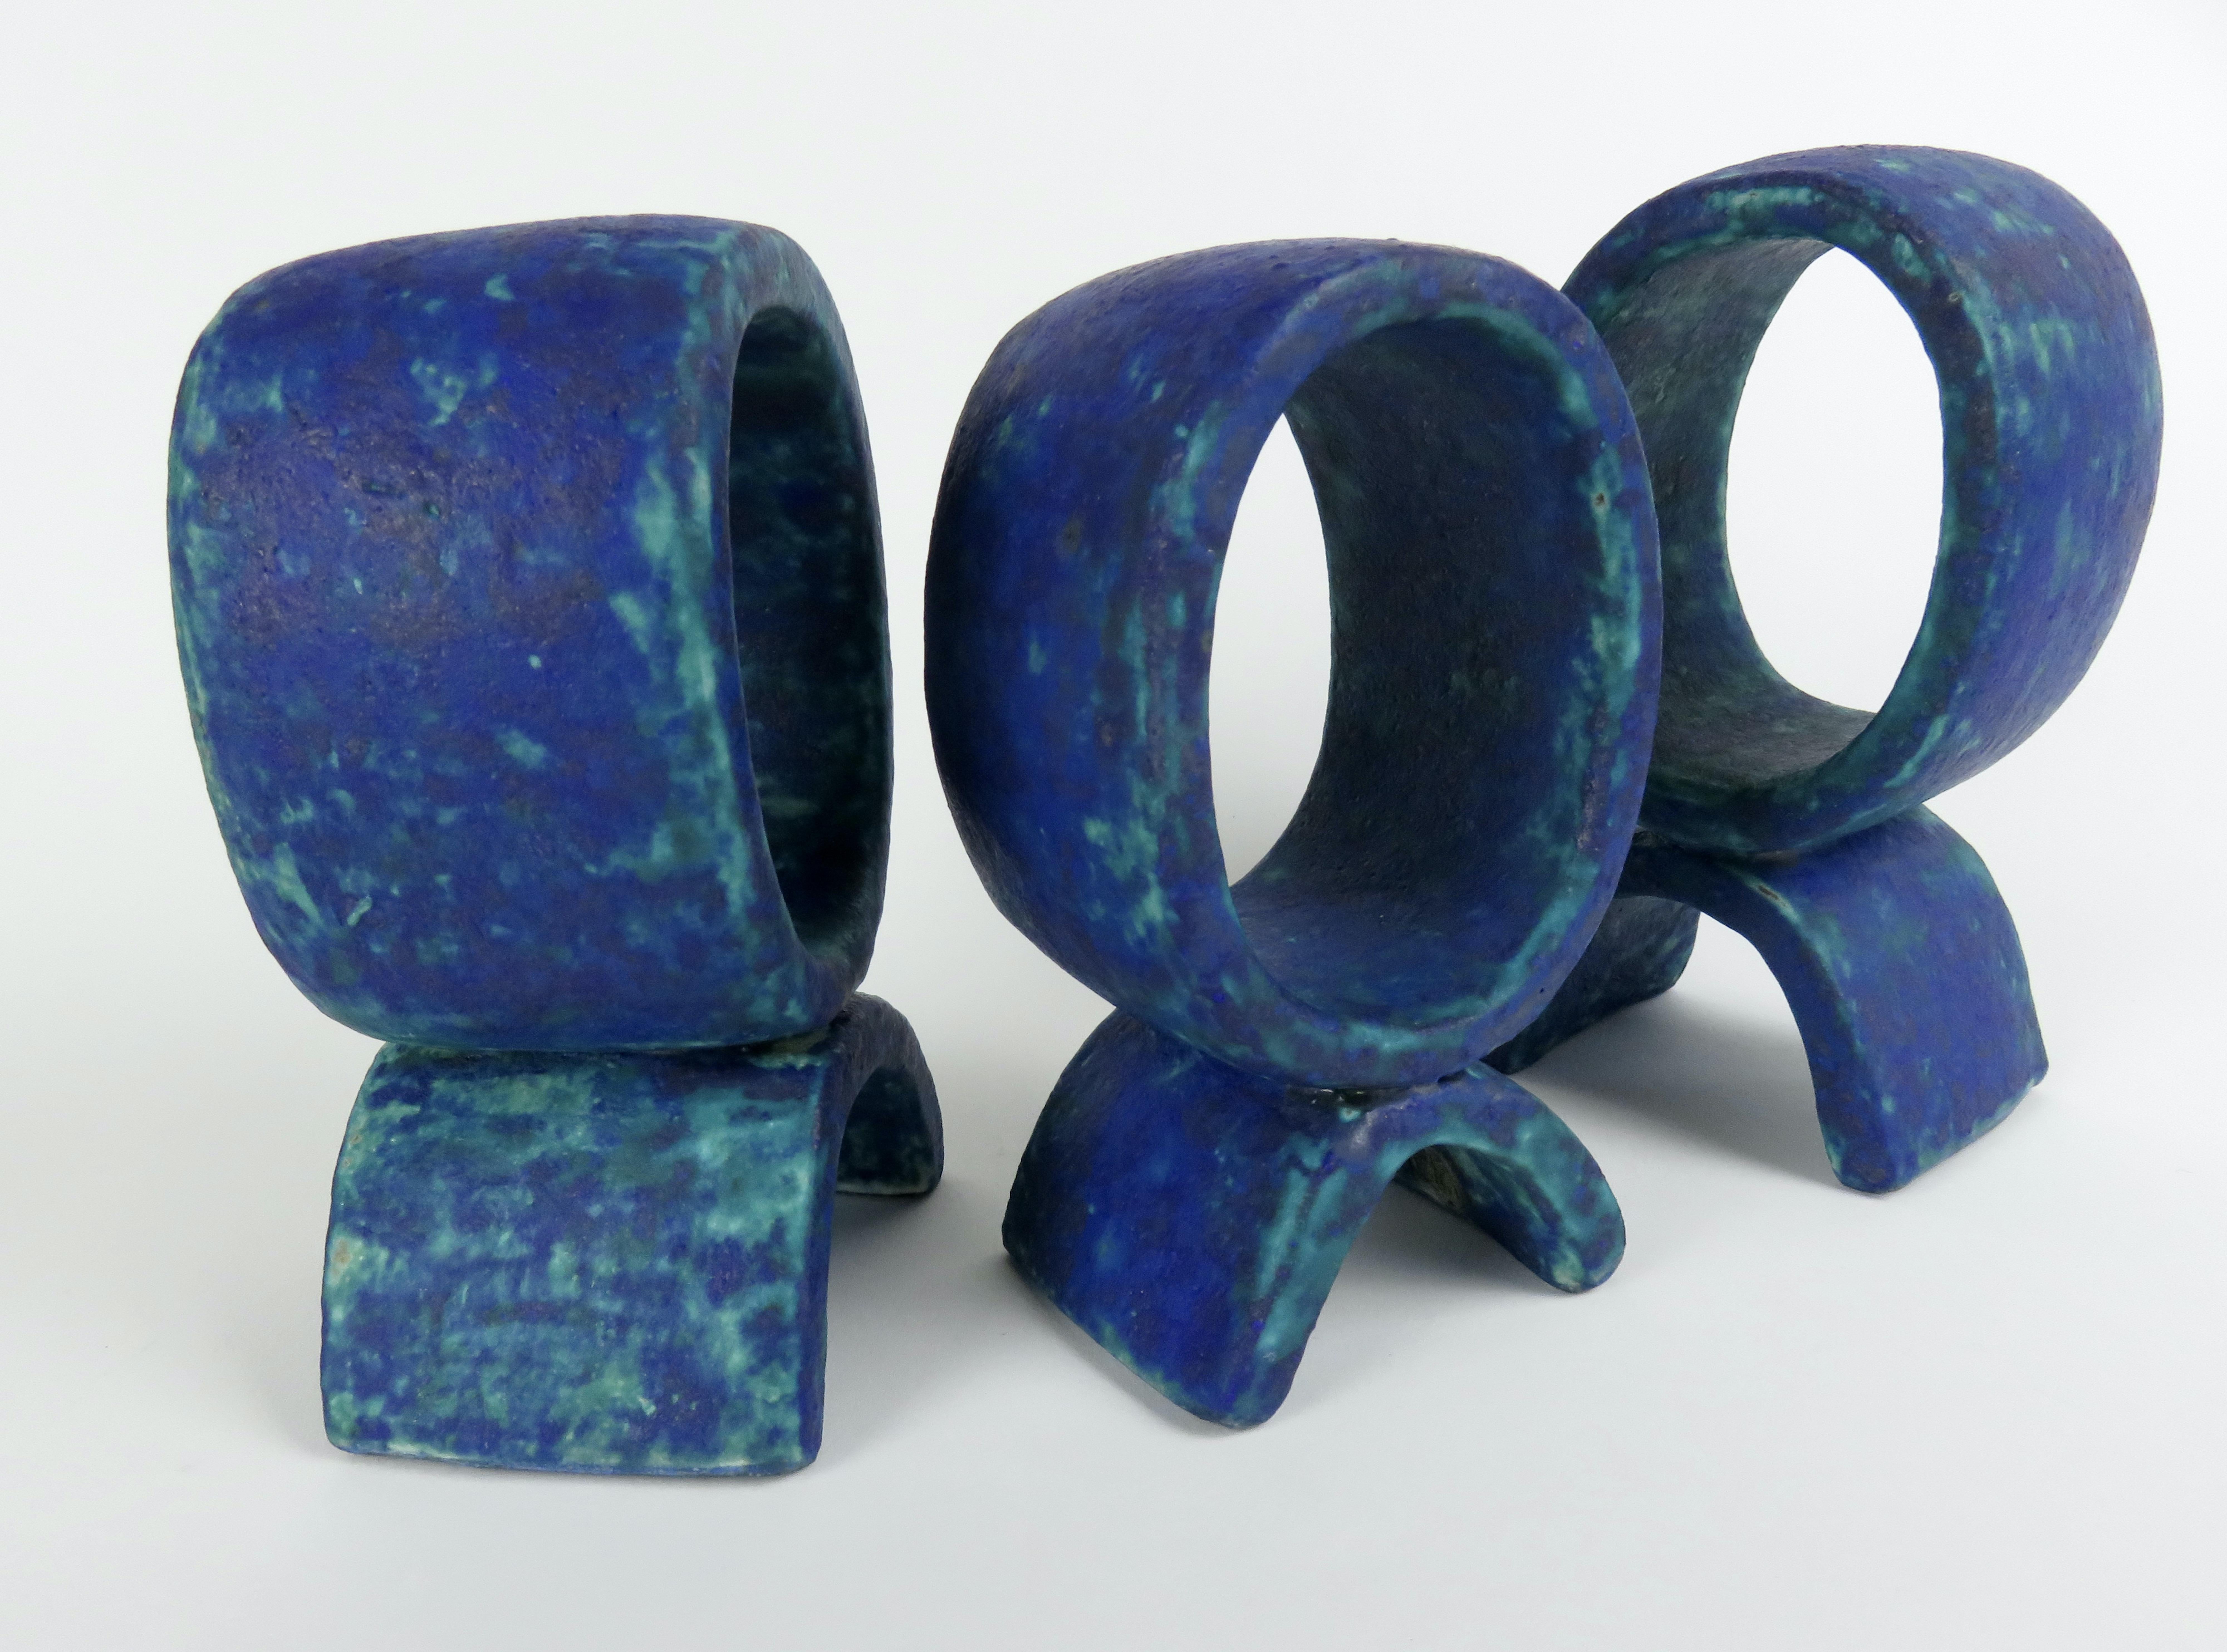 Mottled Turquoise and Deep Blue, 3 Ceramic Totems, Single Rings on Curved Legs For Sale 3